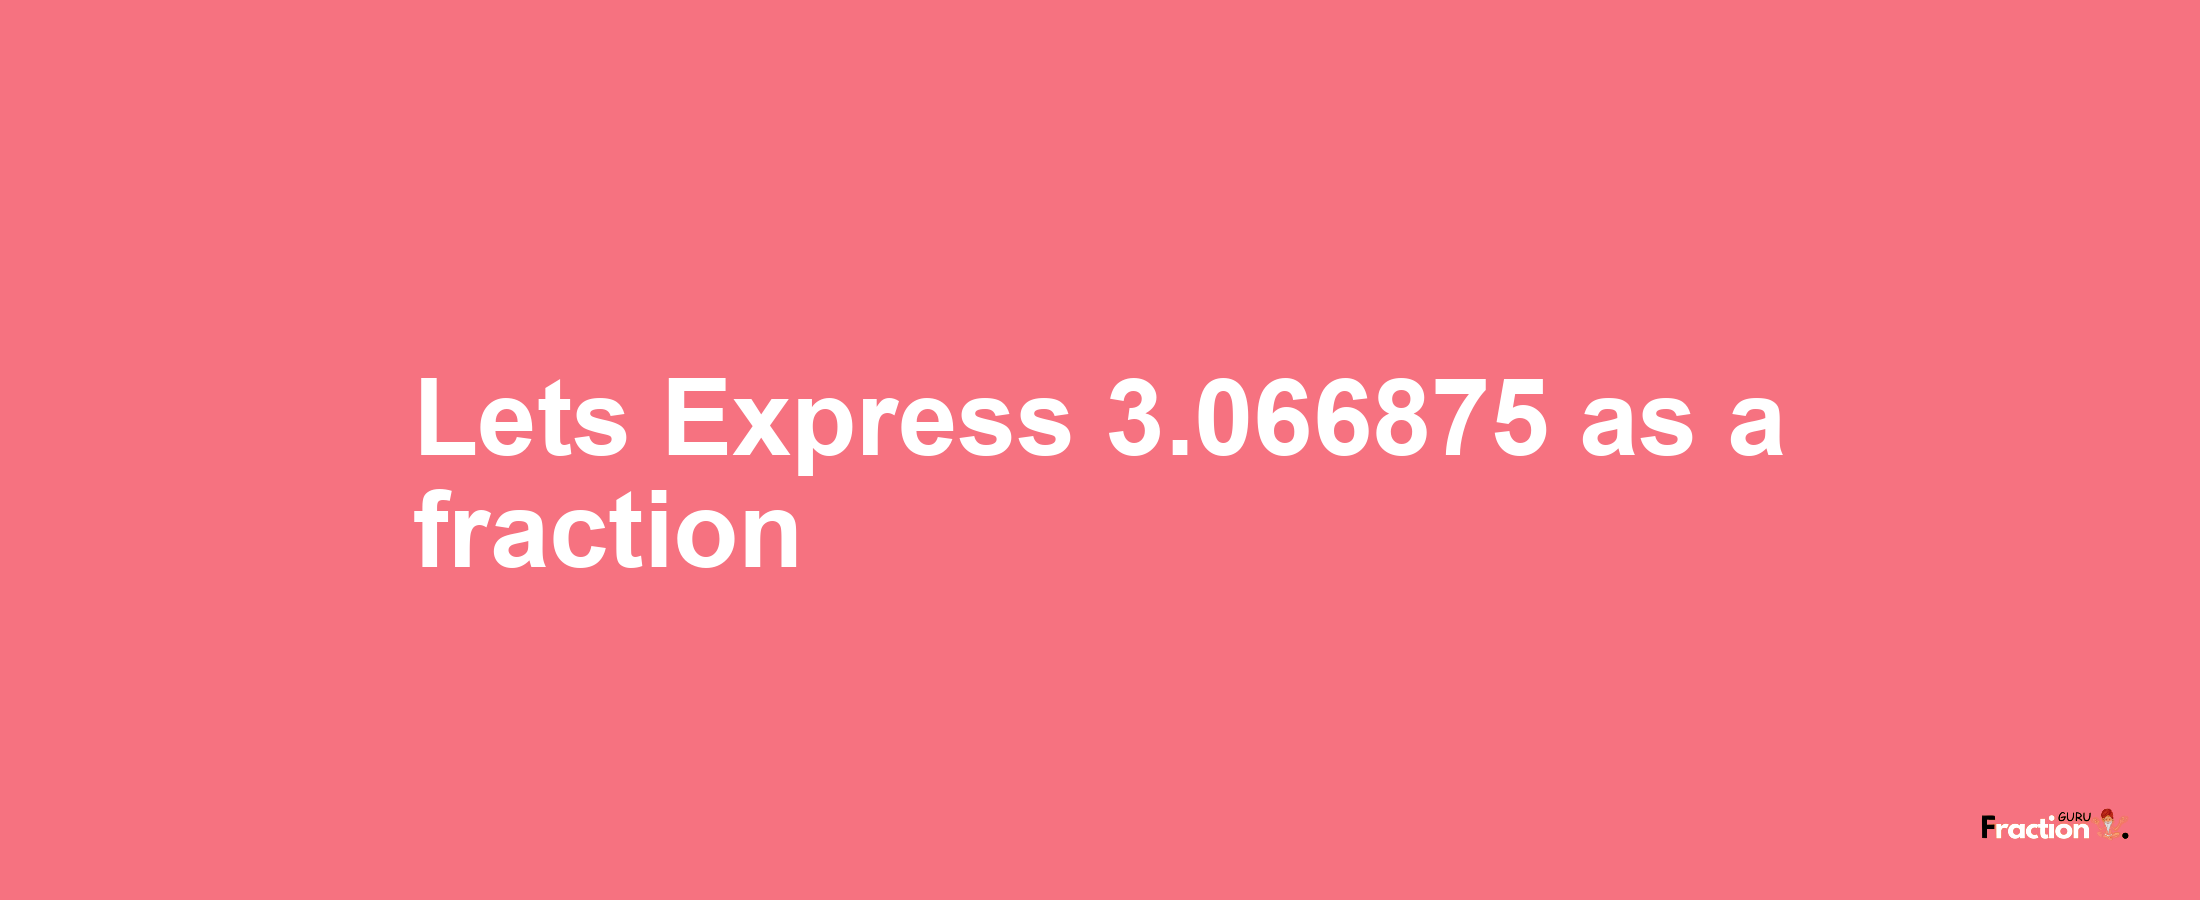 Lets Express 3.066875 as afraction